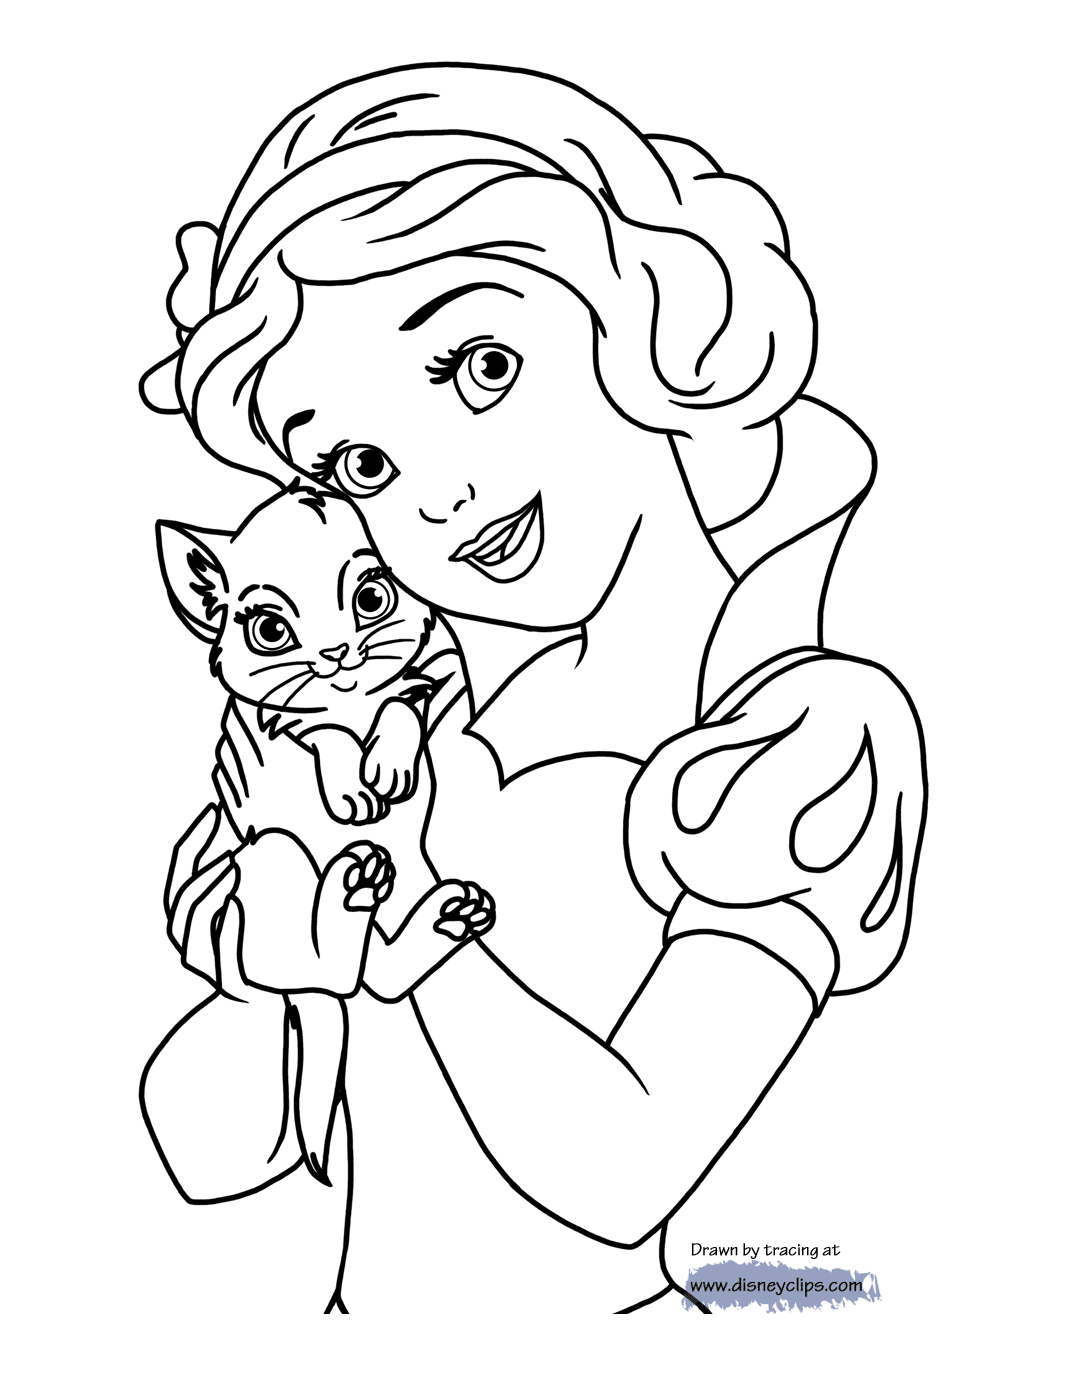 snow white coloring snow white coloring pages disney39s world of wonders white coloring snow 